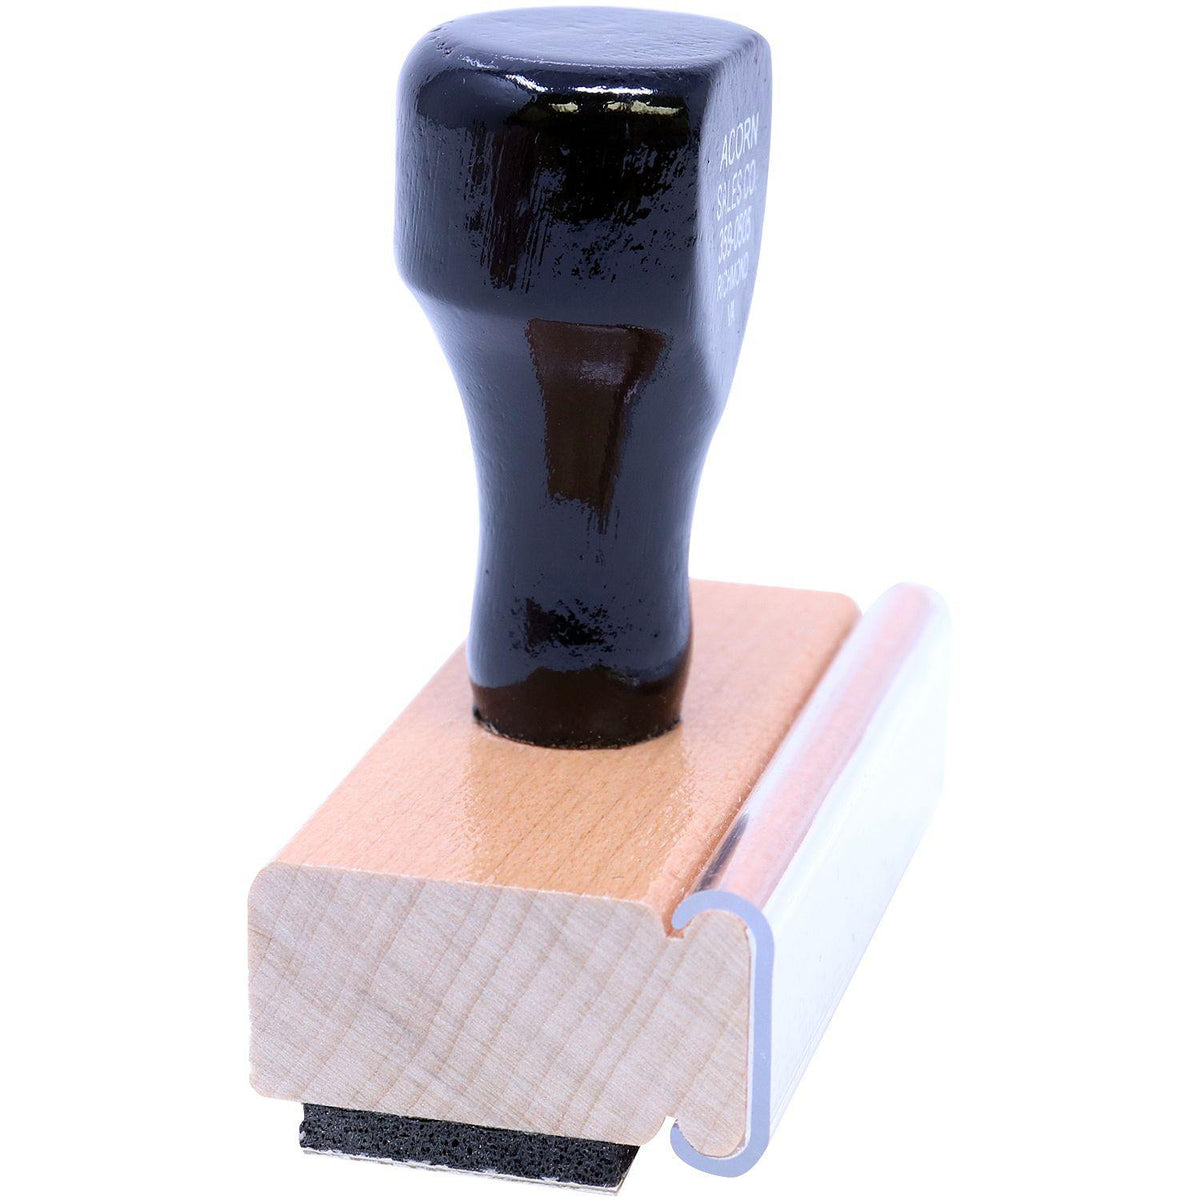 Side View of Ira Rubber Stamp at an Angle